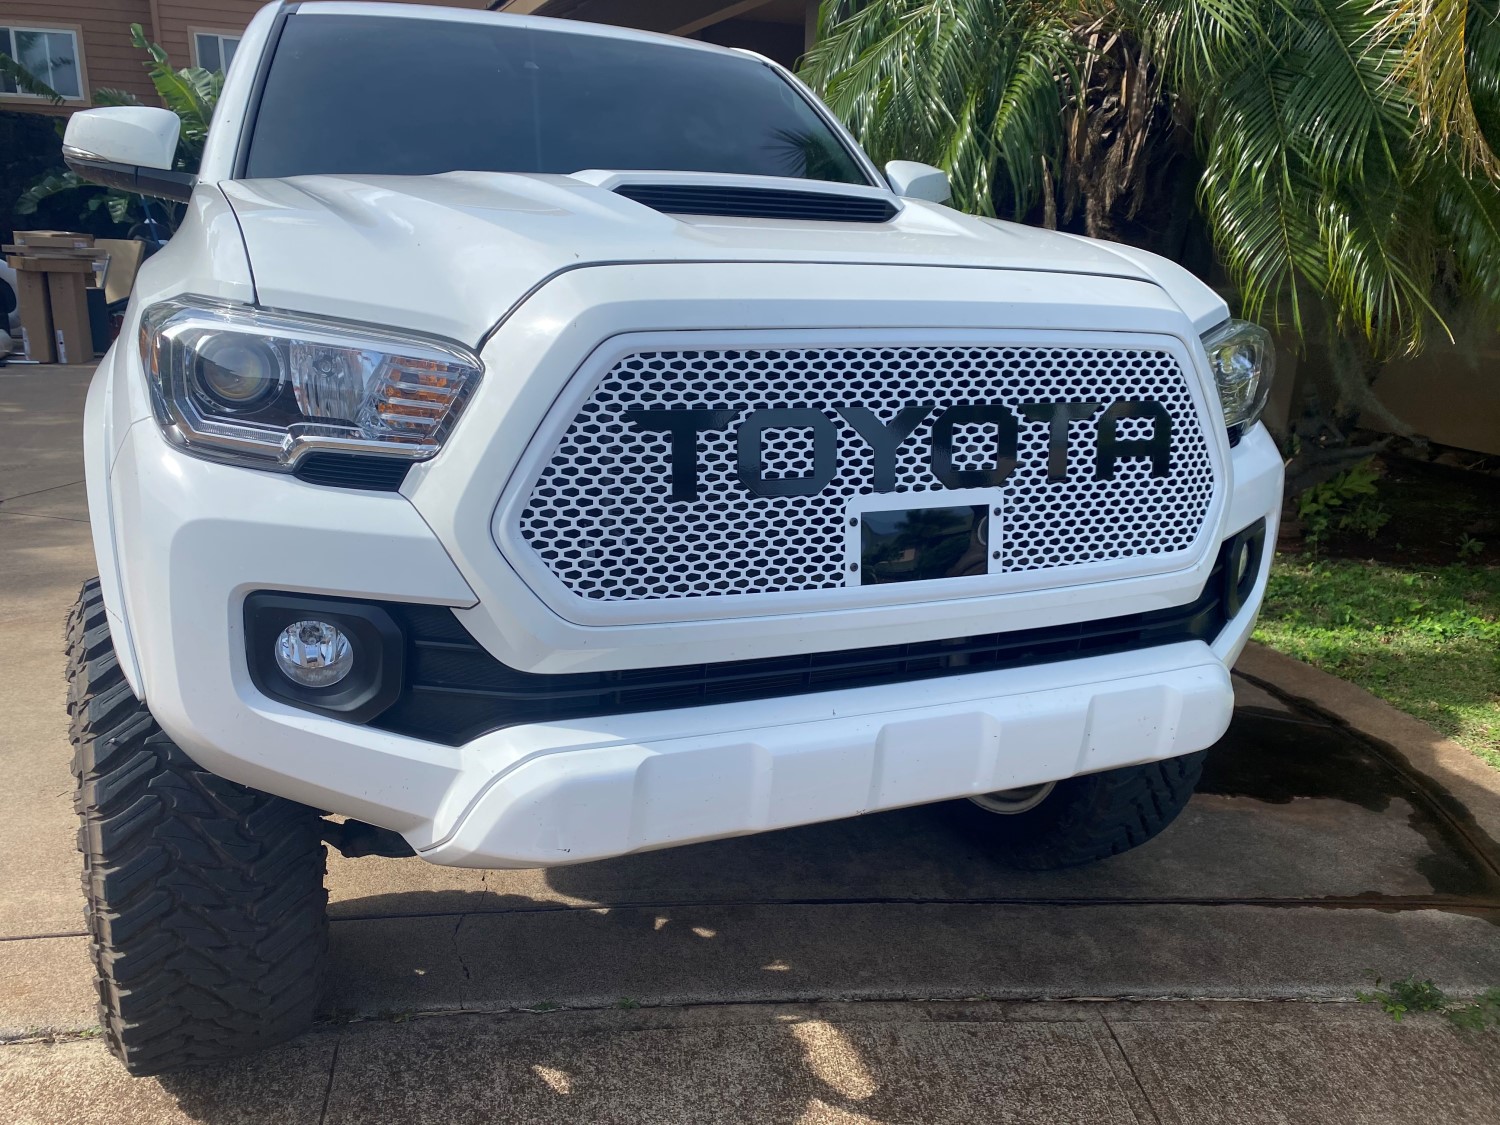 A New Level of Style: Adding a Special White Paint Job on a Reaper Mesh Grille for a Toyota Tacoma